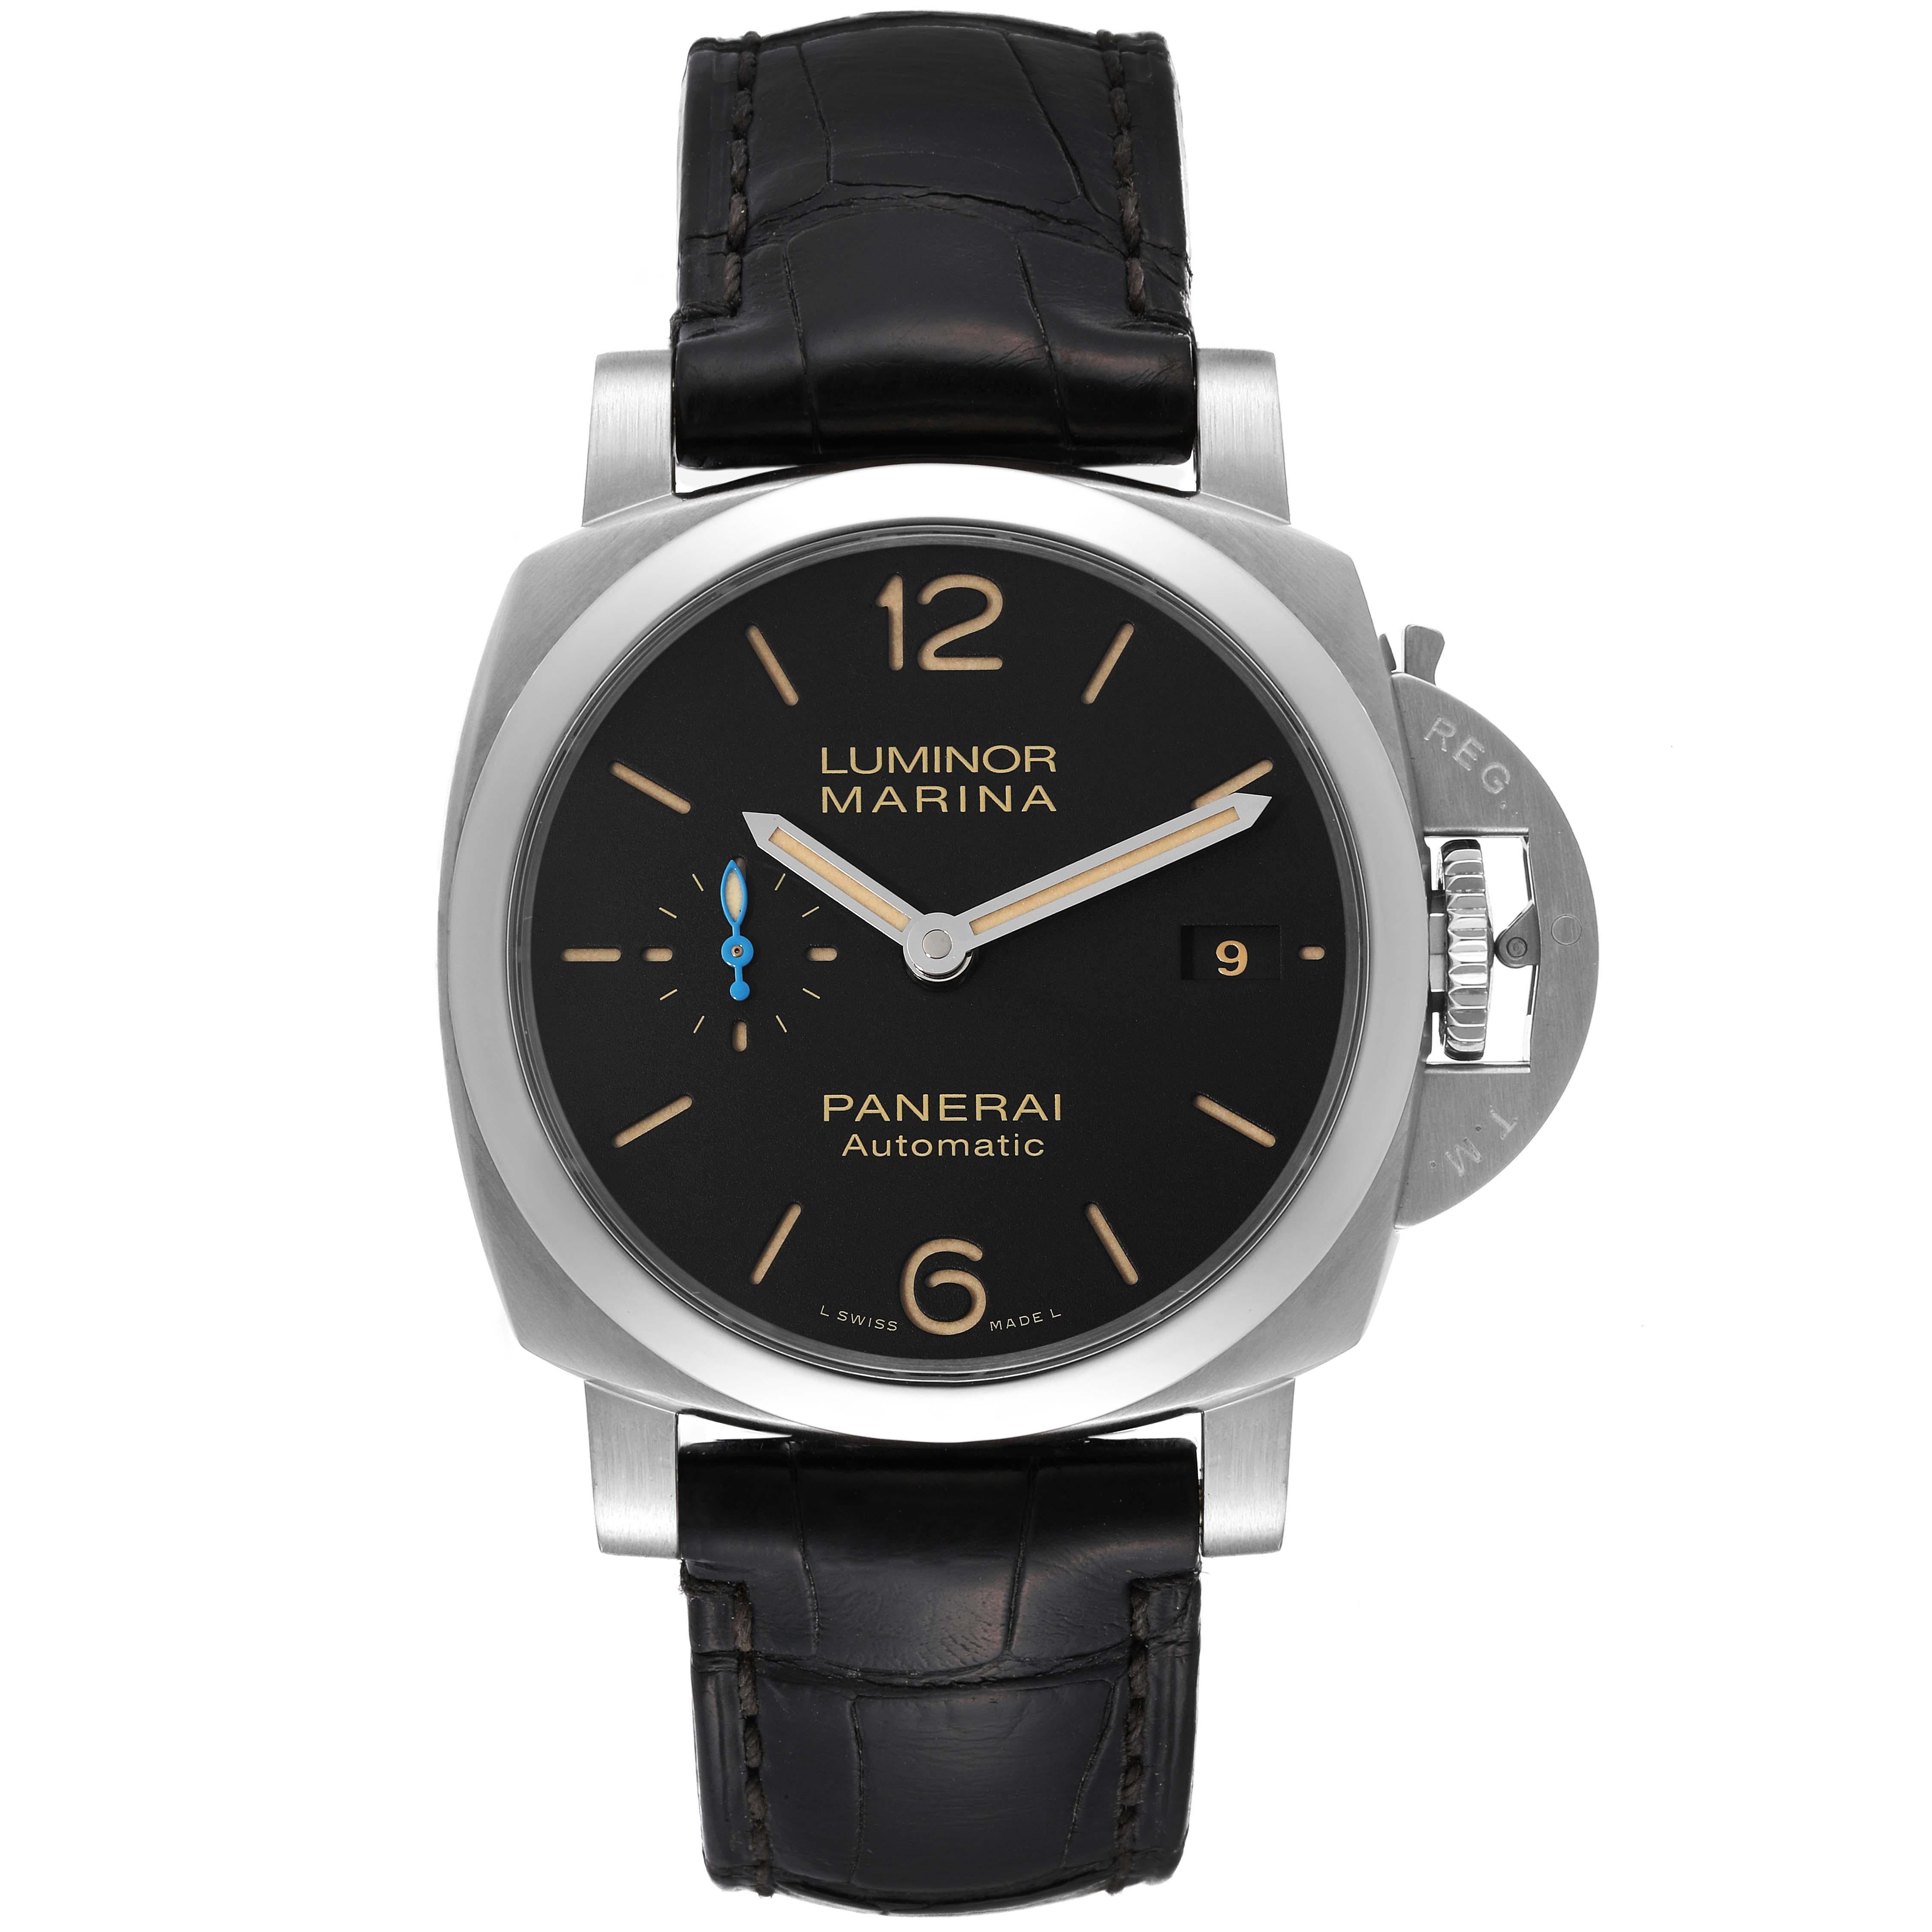 Panerai Luminor Marina 1950 42mm Black Dial Steel Mens Watch PAM01392. Automatic self-winding movement. Two part cushion shaped stainless steel case 42.0 mm in diameter. Panerai patented crown protector. Transparent exhibition sapphire crystal case